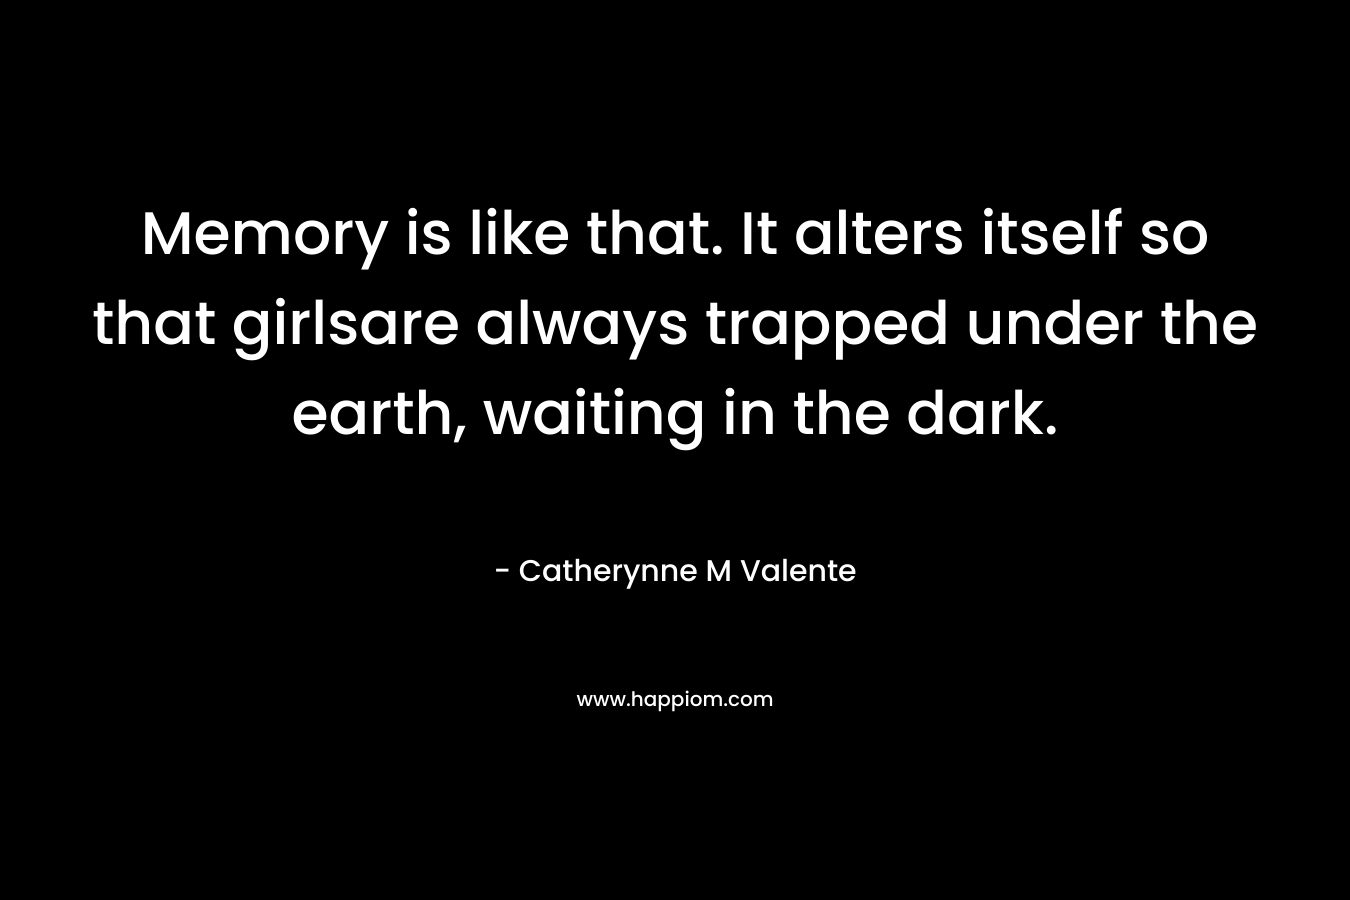 Memory is like that. It alters itself so that girlsare always trapped under the earth, waiting in the dark.